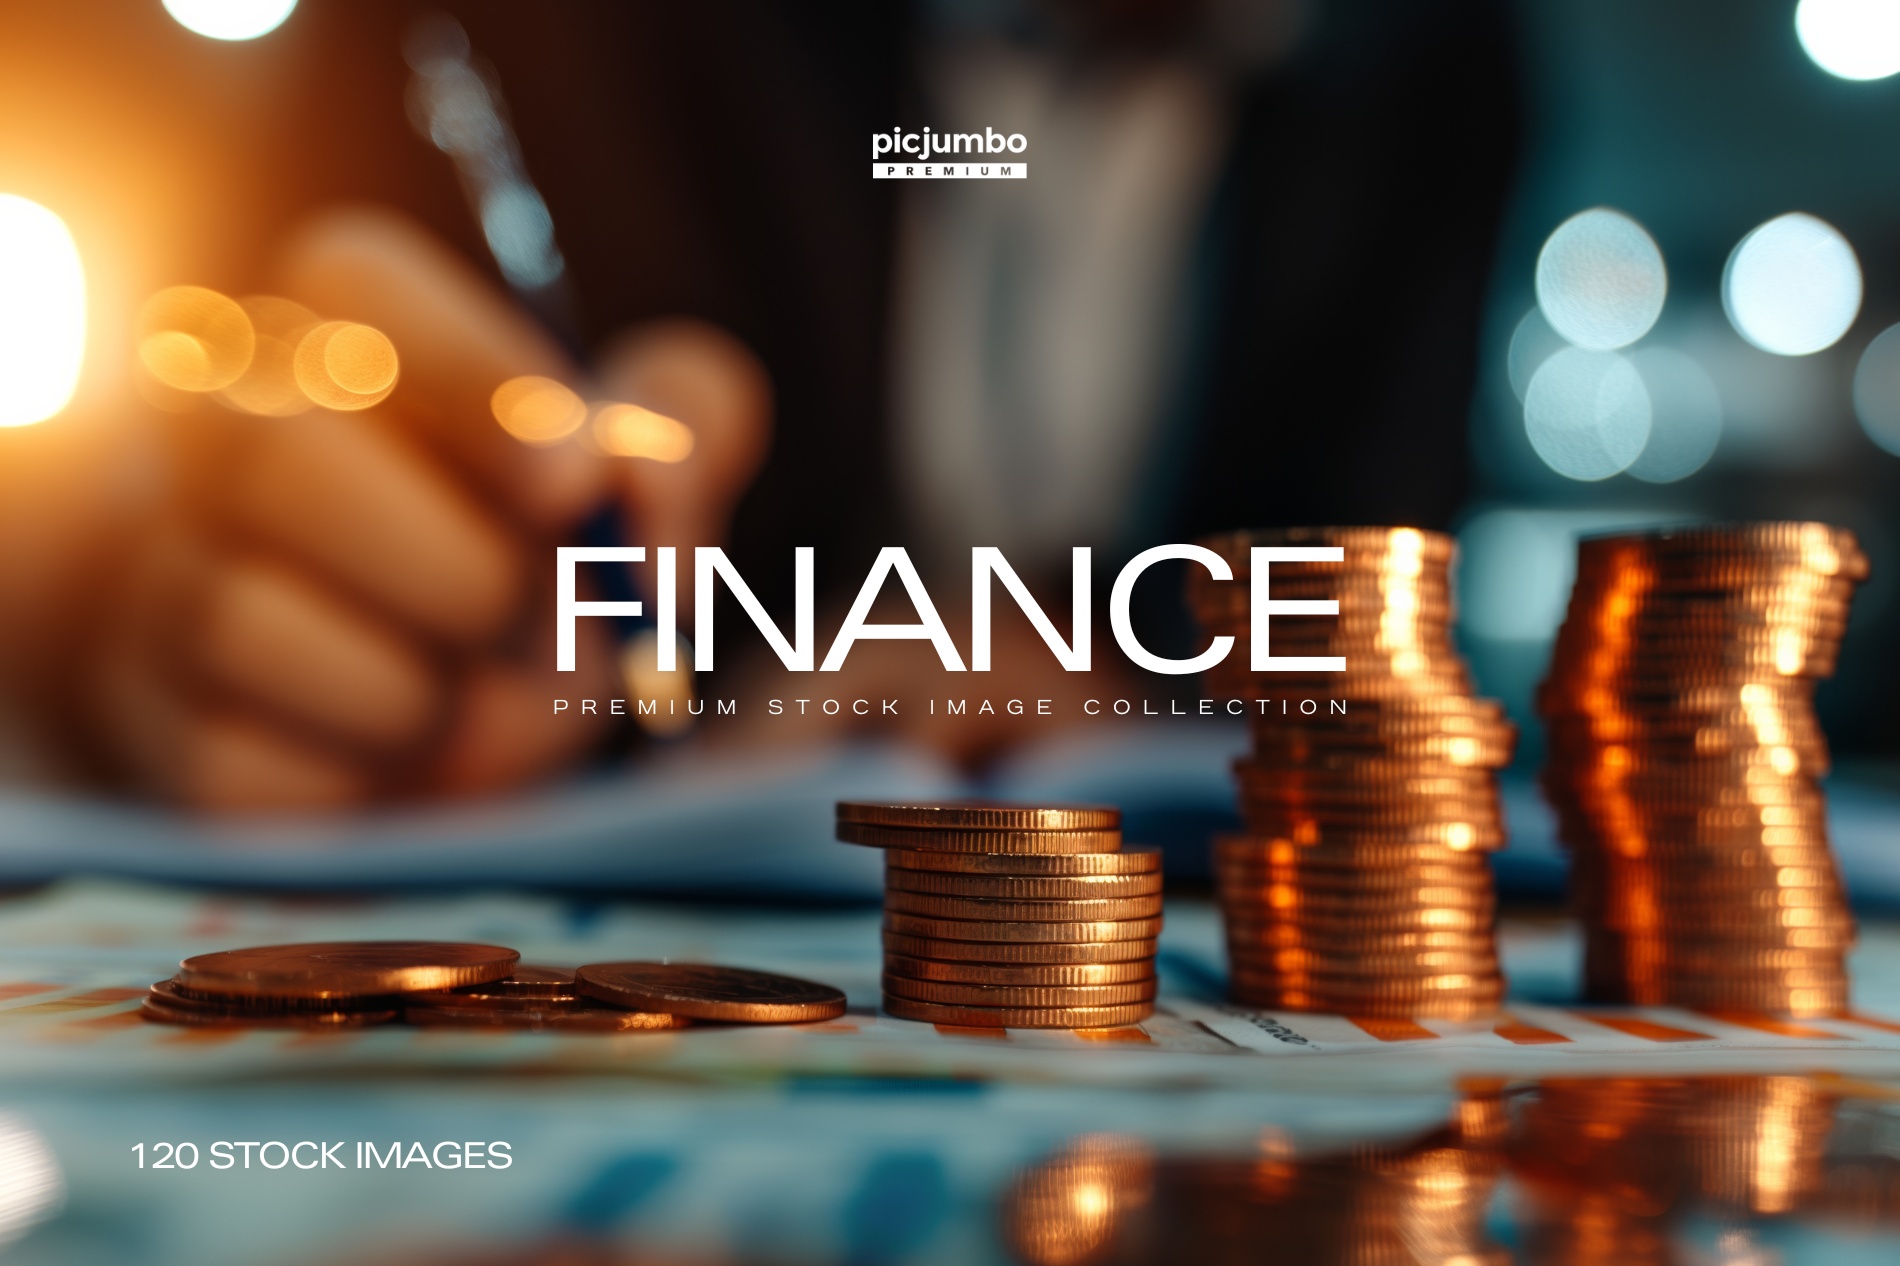 Download hi-res stock photos from our Finance PREMIUM Collection!